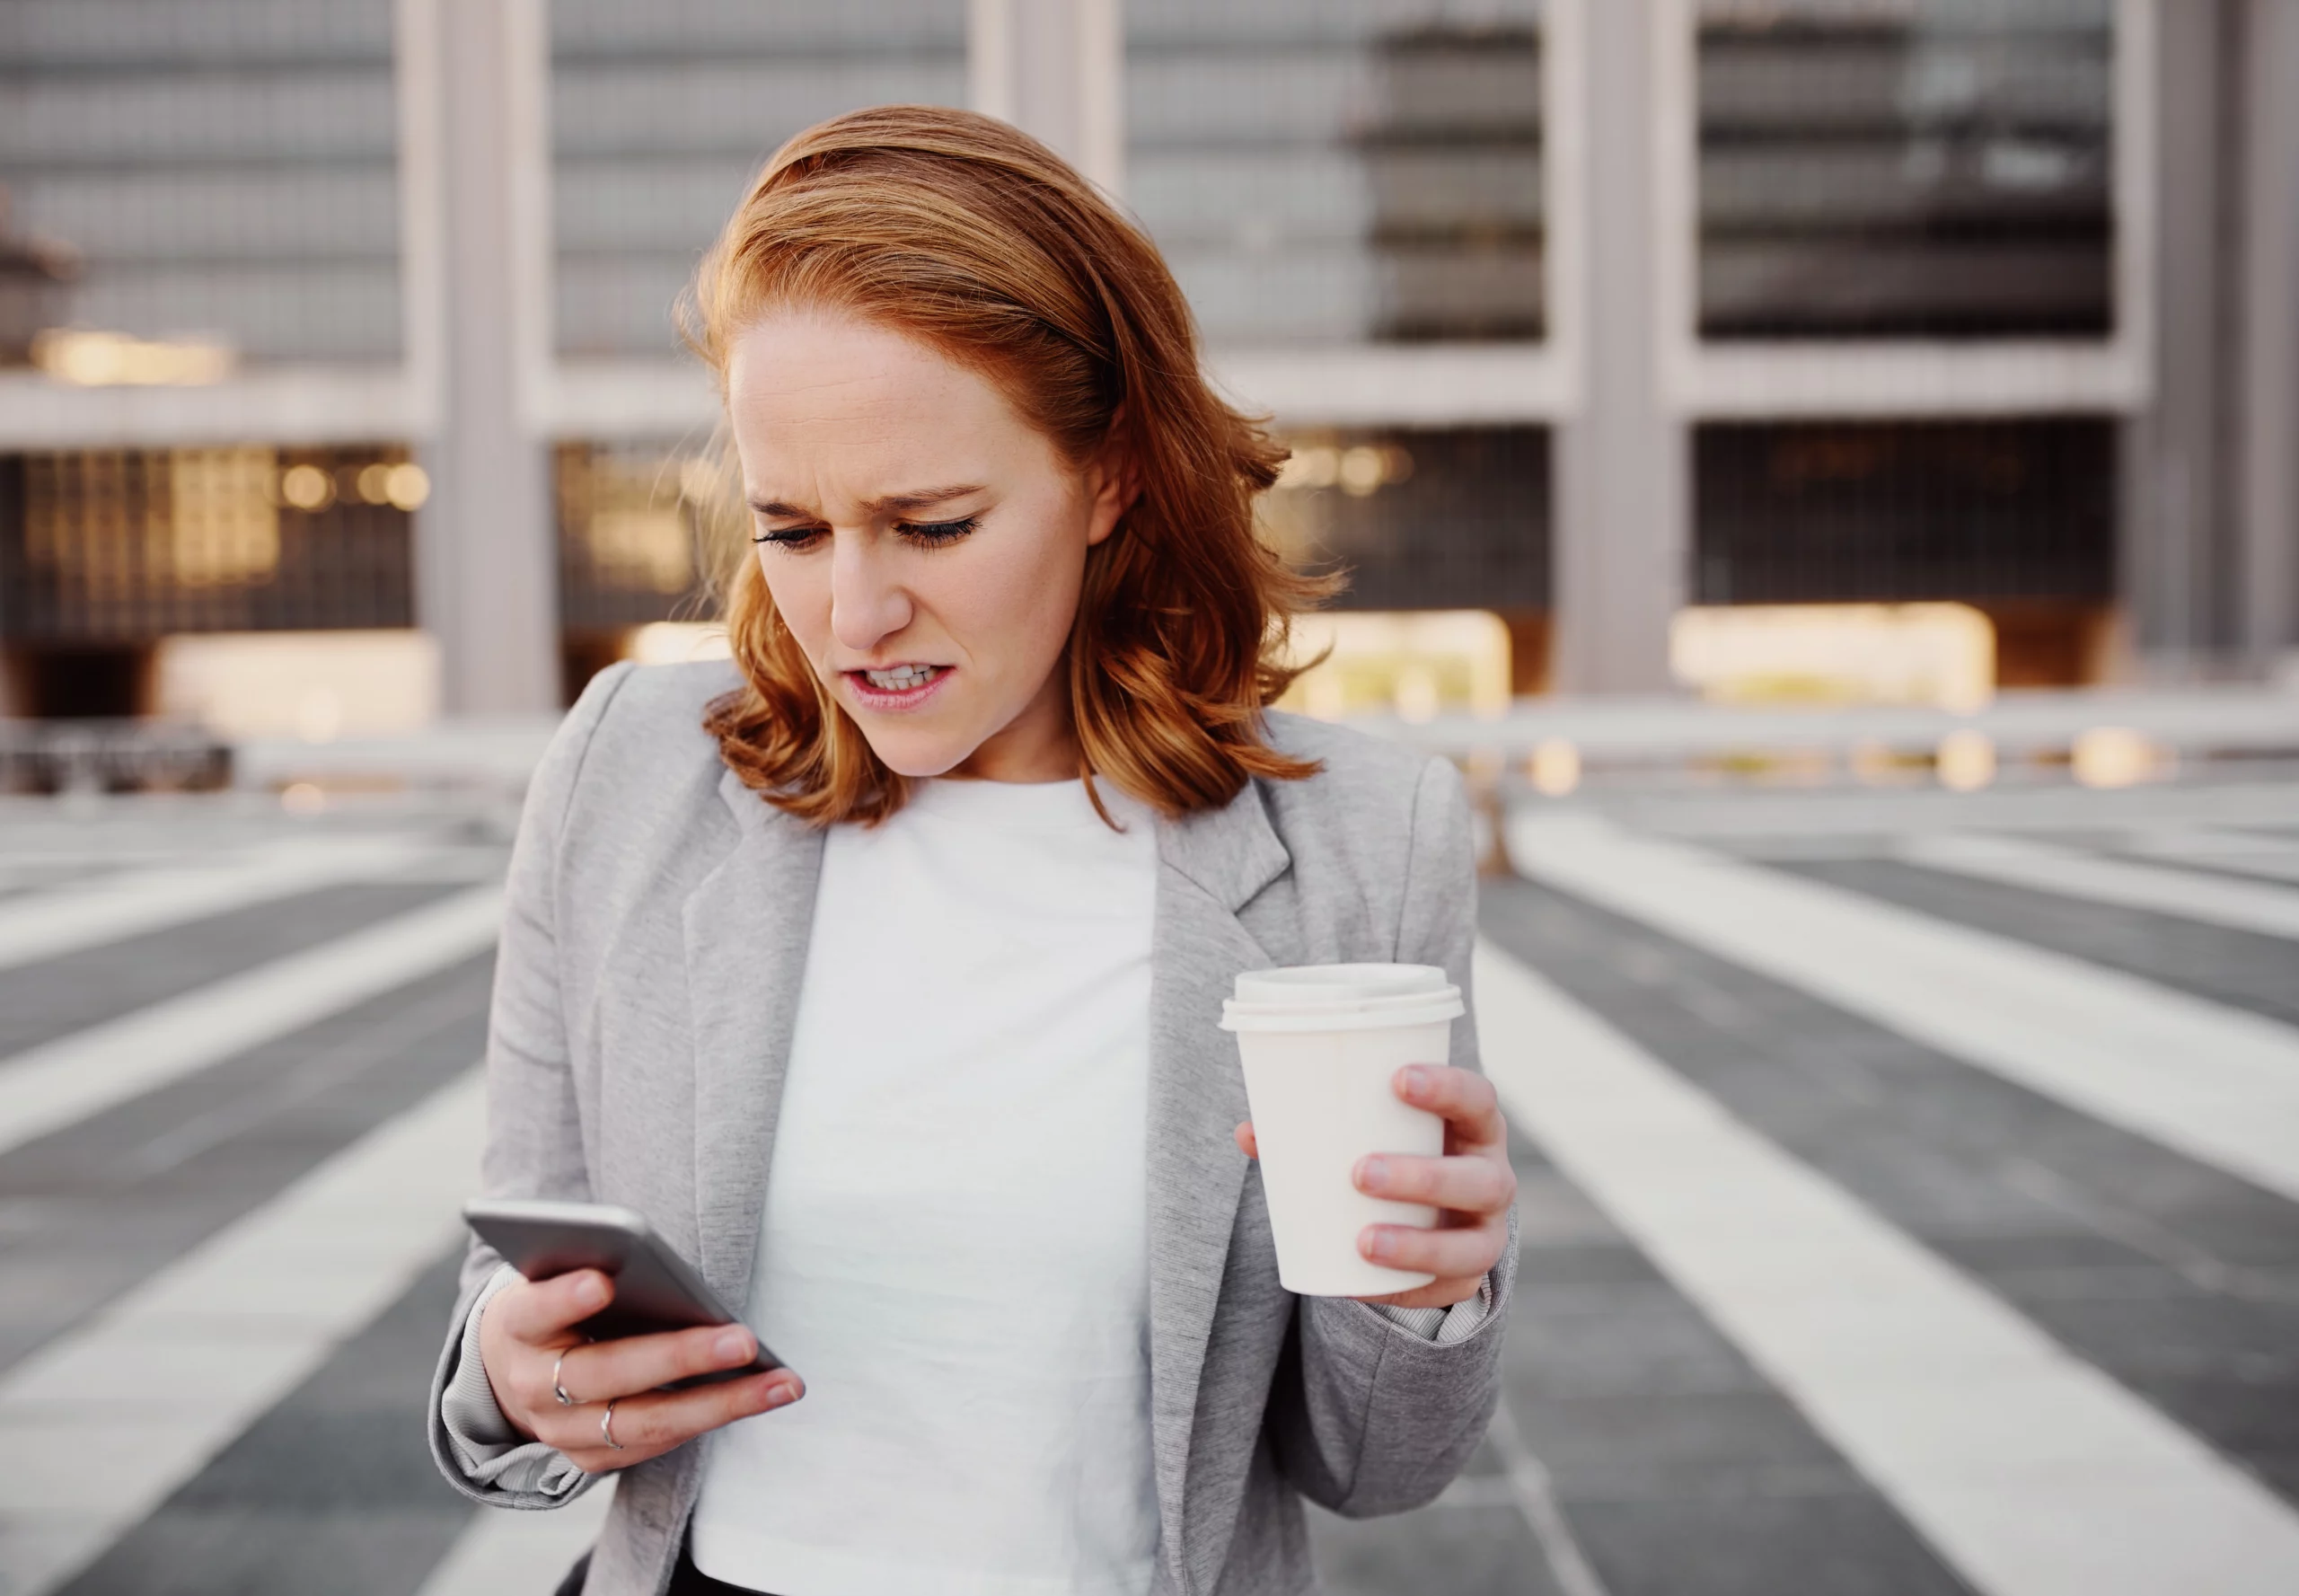 Frustrated young woman in formal clothing looking at smartphone while holding coffee cup